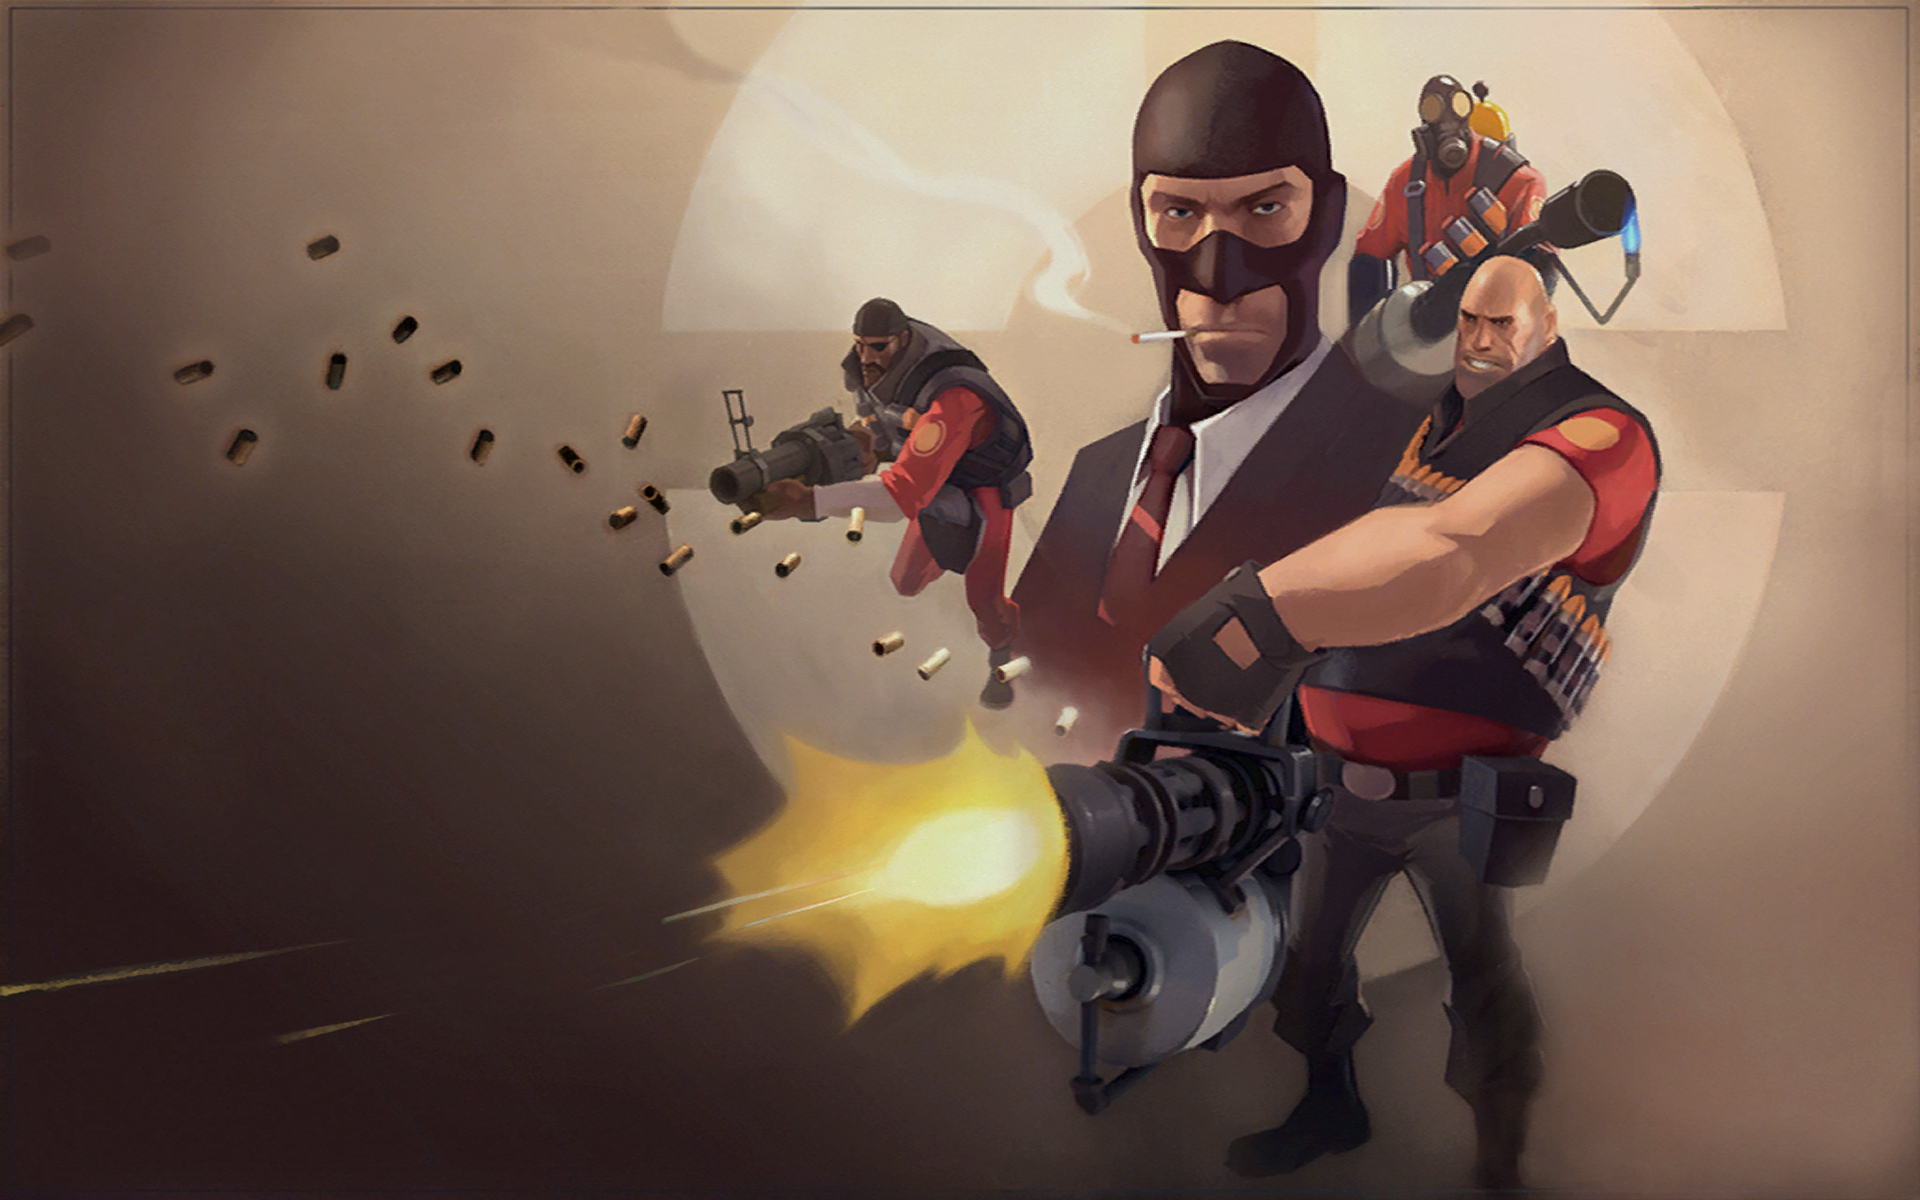 Heavy Team Fortress Pyro Team Fortress Soldier Team Fortress Spy Team Fortress Team Fortress 2 1920x1200